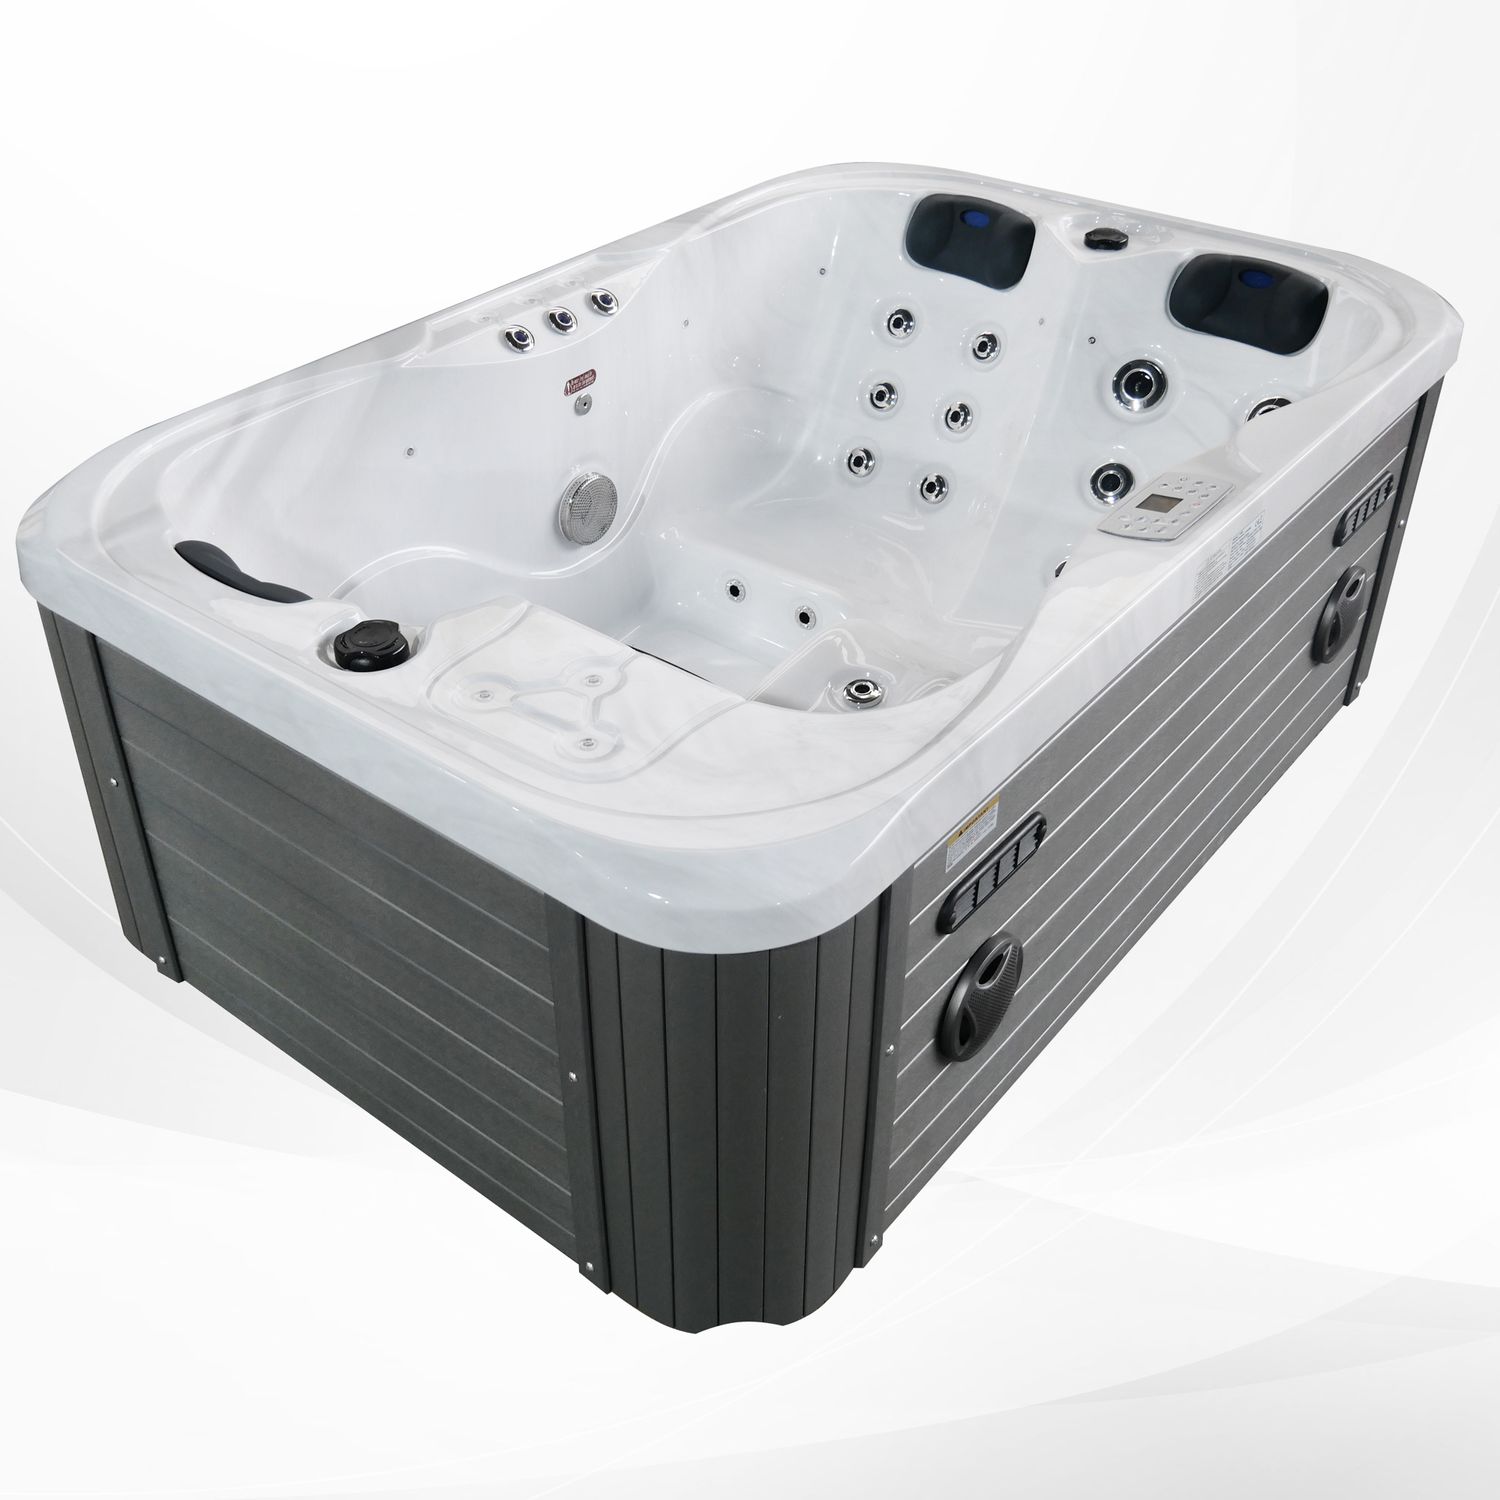 604 Outdoor Whirlpool Spa TINO Weiss 2